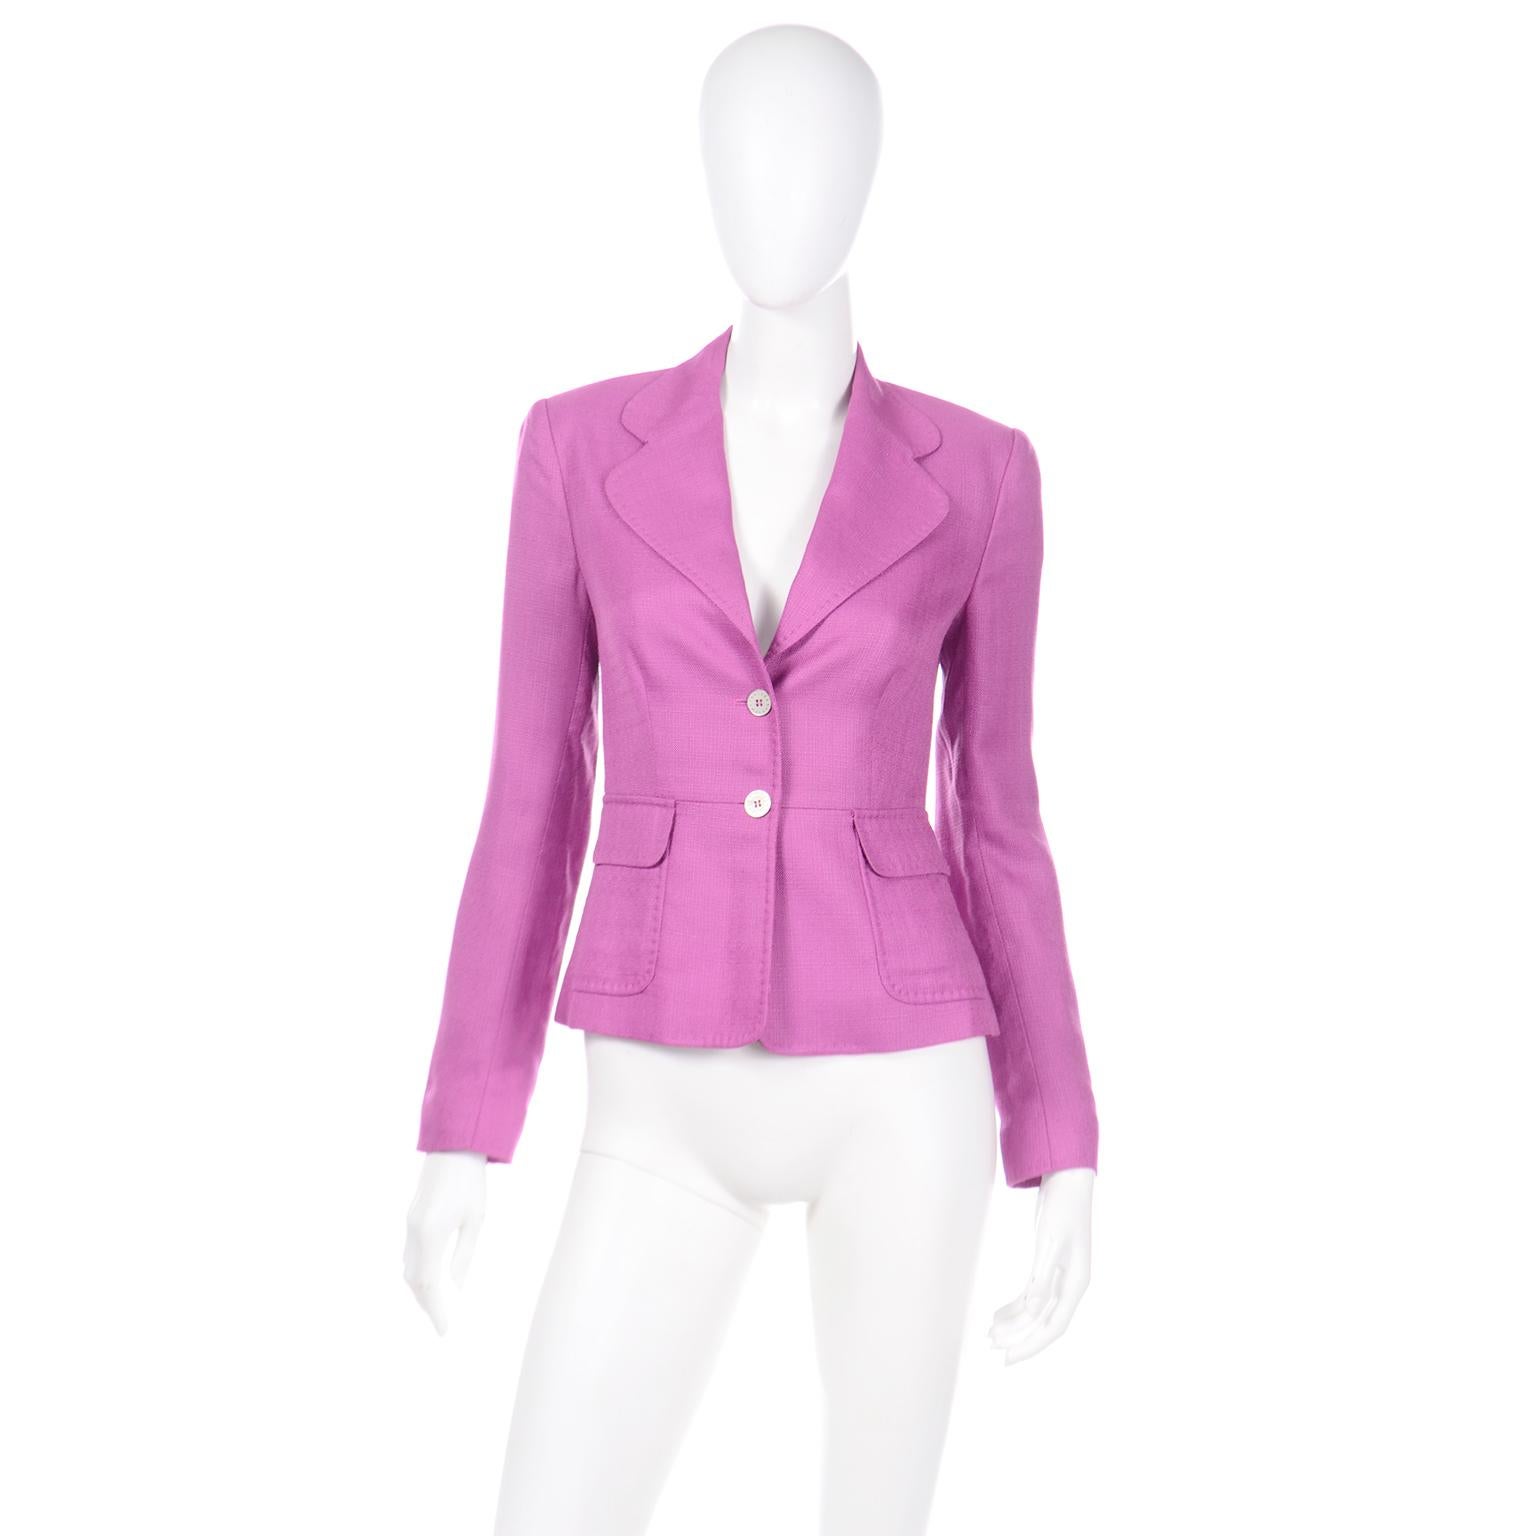 This fabulous Dolce & Gabbana blazer style jacket is in a pretty textured purple viscose. The jacket has front patch pockets, really unique topstitching, 2 branded front buttons, and it is fully lined. Both fabric and metal hang tag label are found.